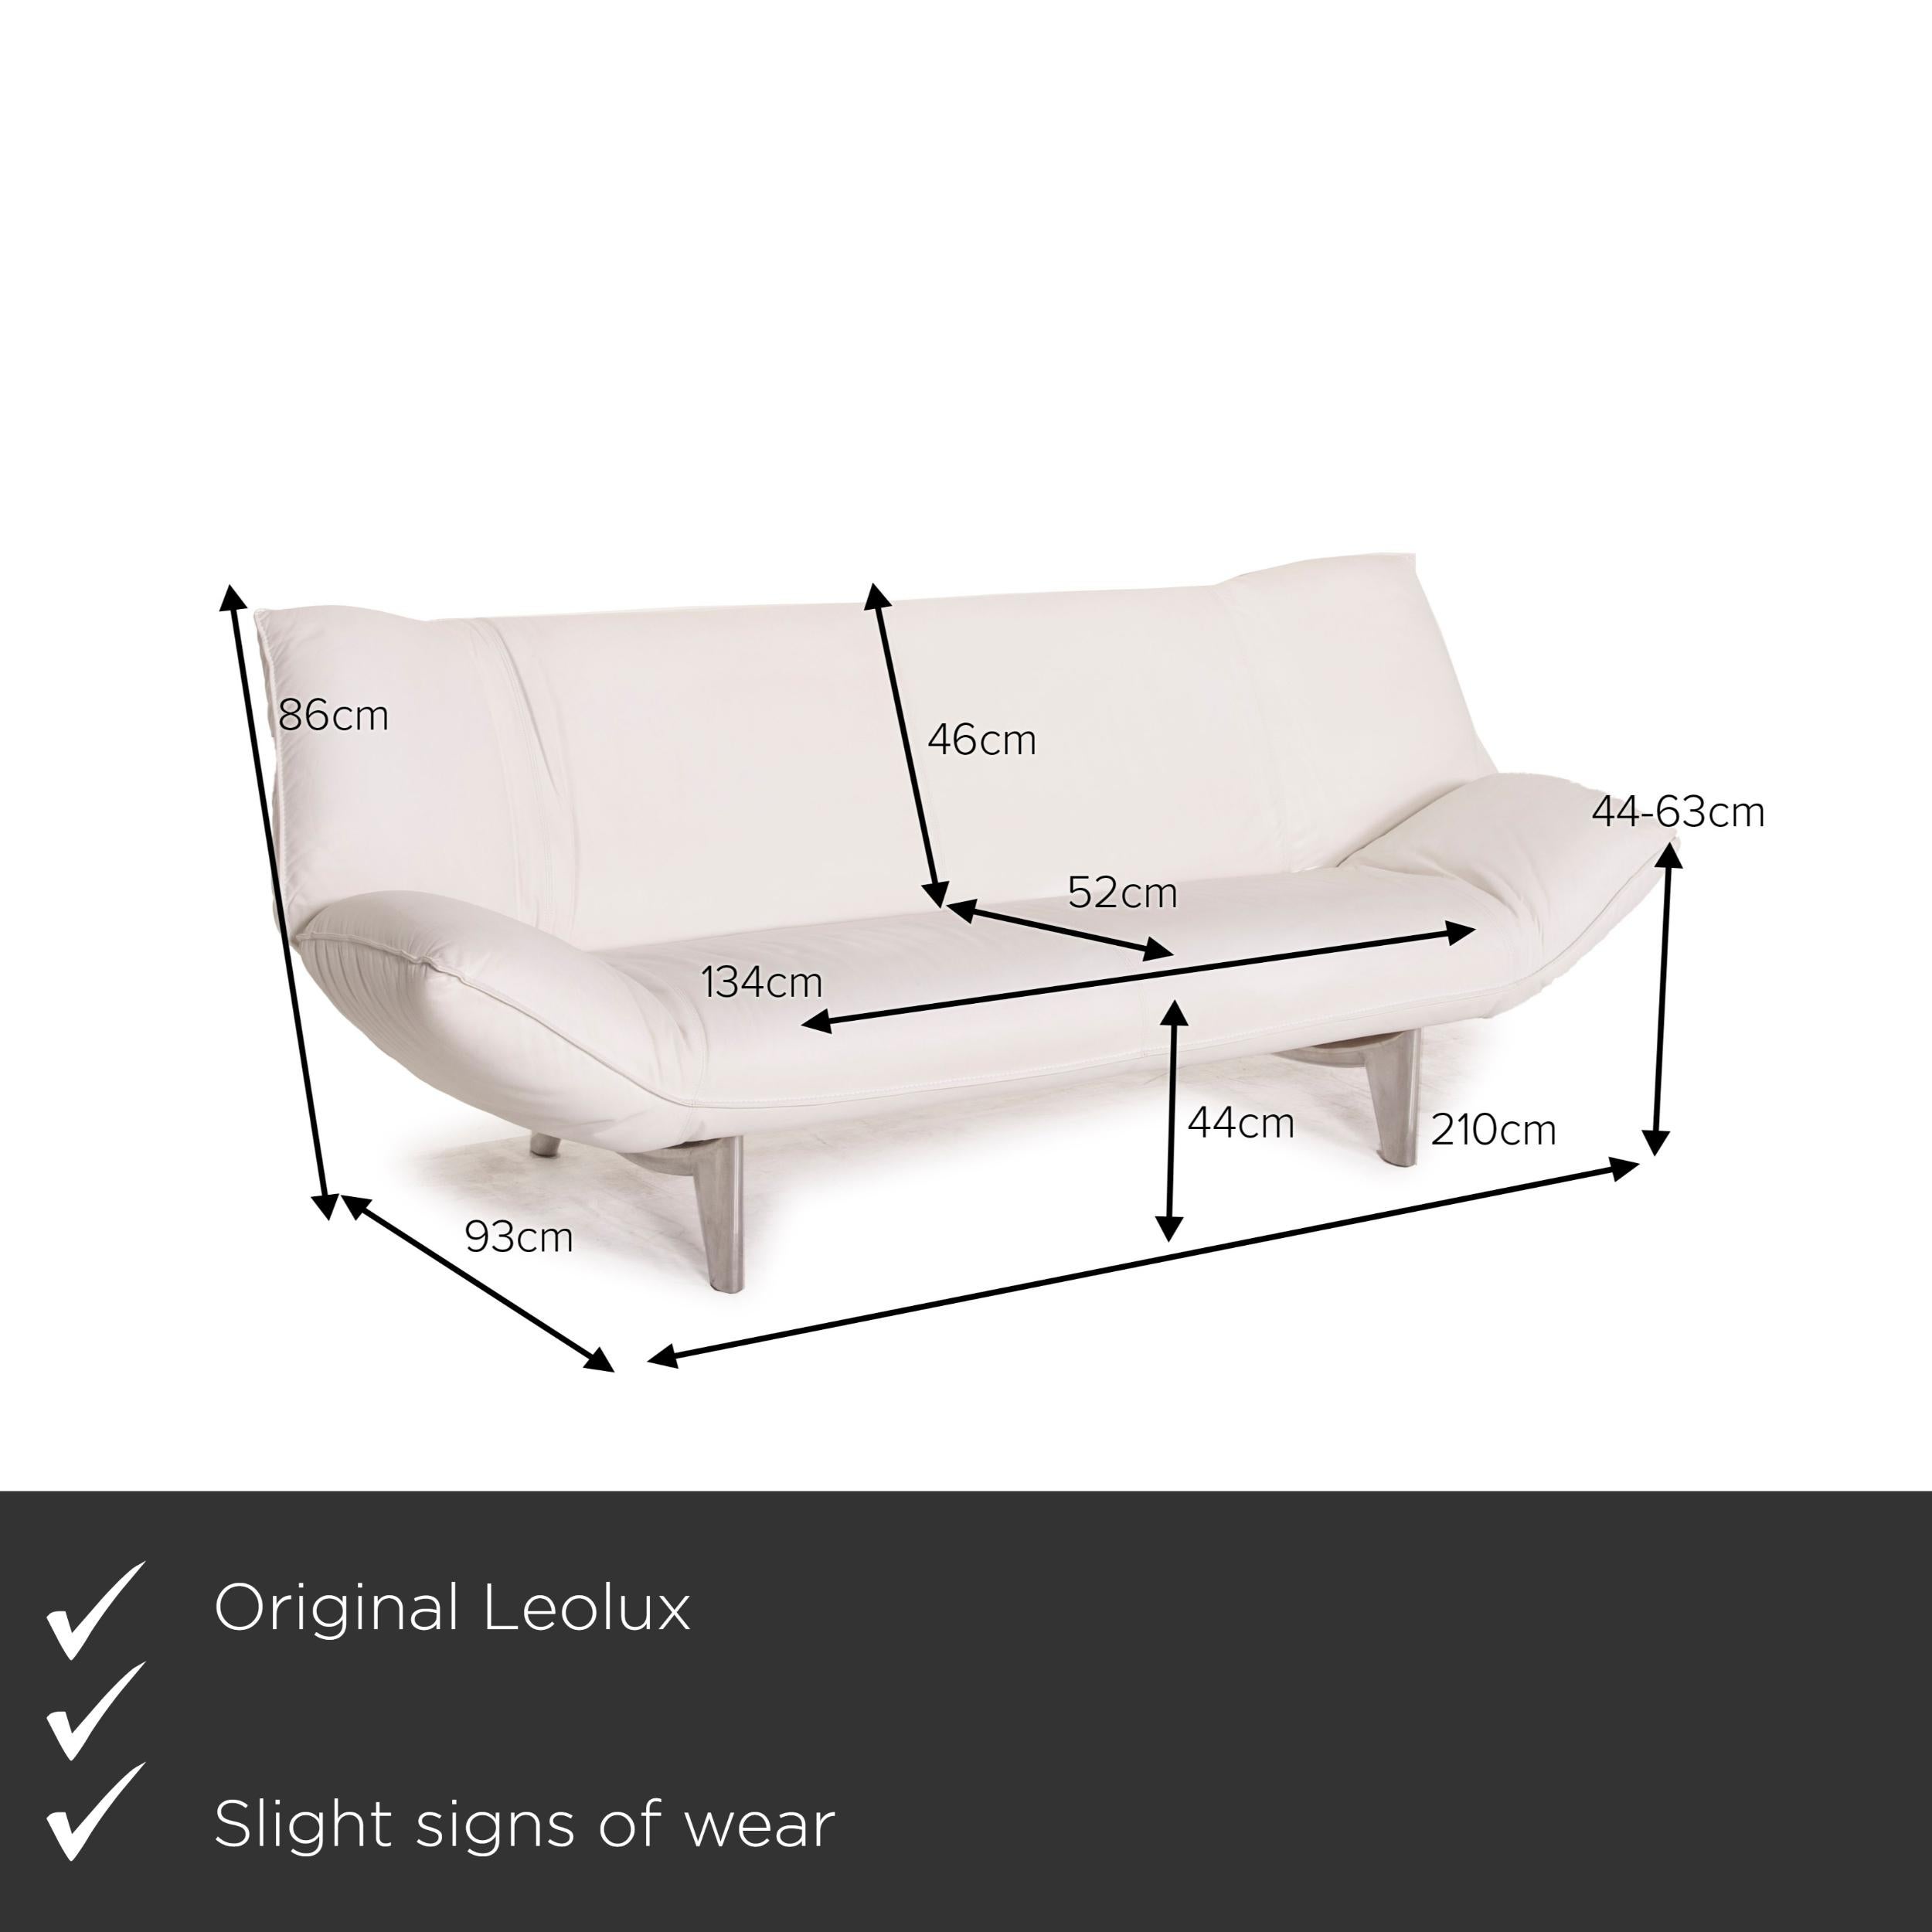 We present to you a Leolux Tango leather sofa white two-seater function.


 Product measurements in centimeters:
 

Depth: 93
Width: 210
Height: 86
Seat height: 44
Rest height: 44
Seat depth: 52
Seat width: 134
Back height: 46.
 